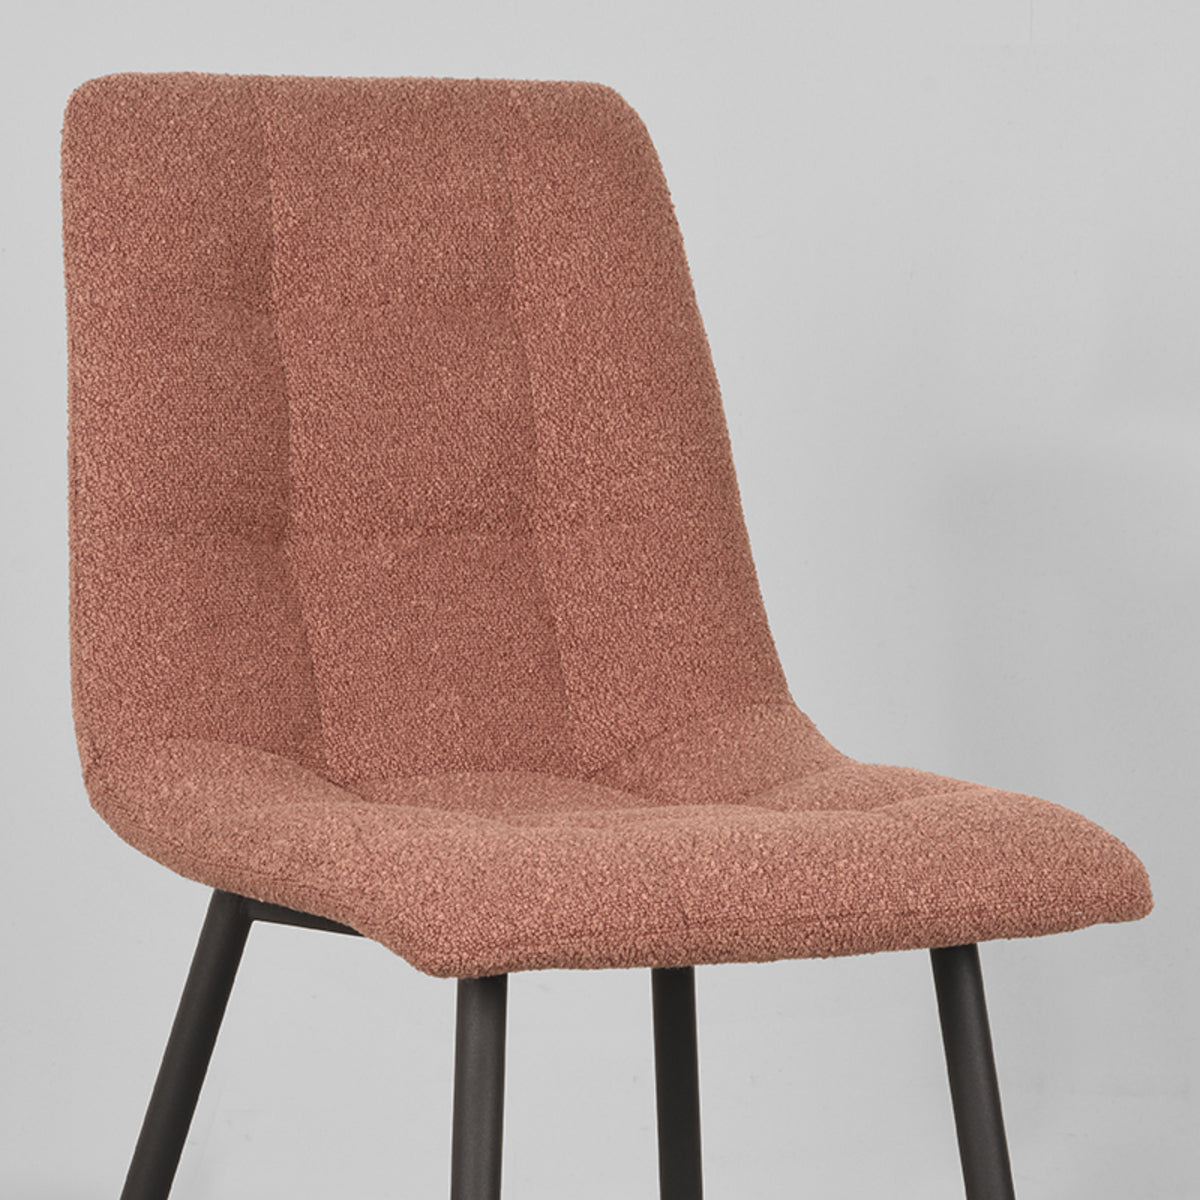 LABEL51 Juul dining room chair - Terra - Boucle | 2 pcs